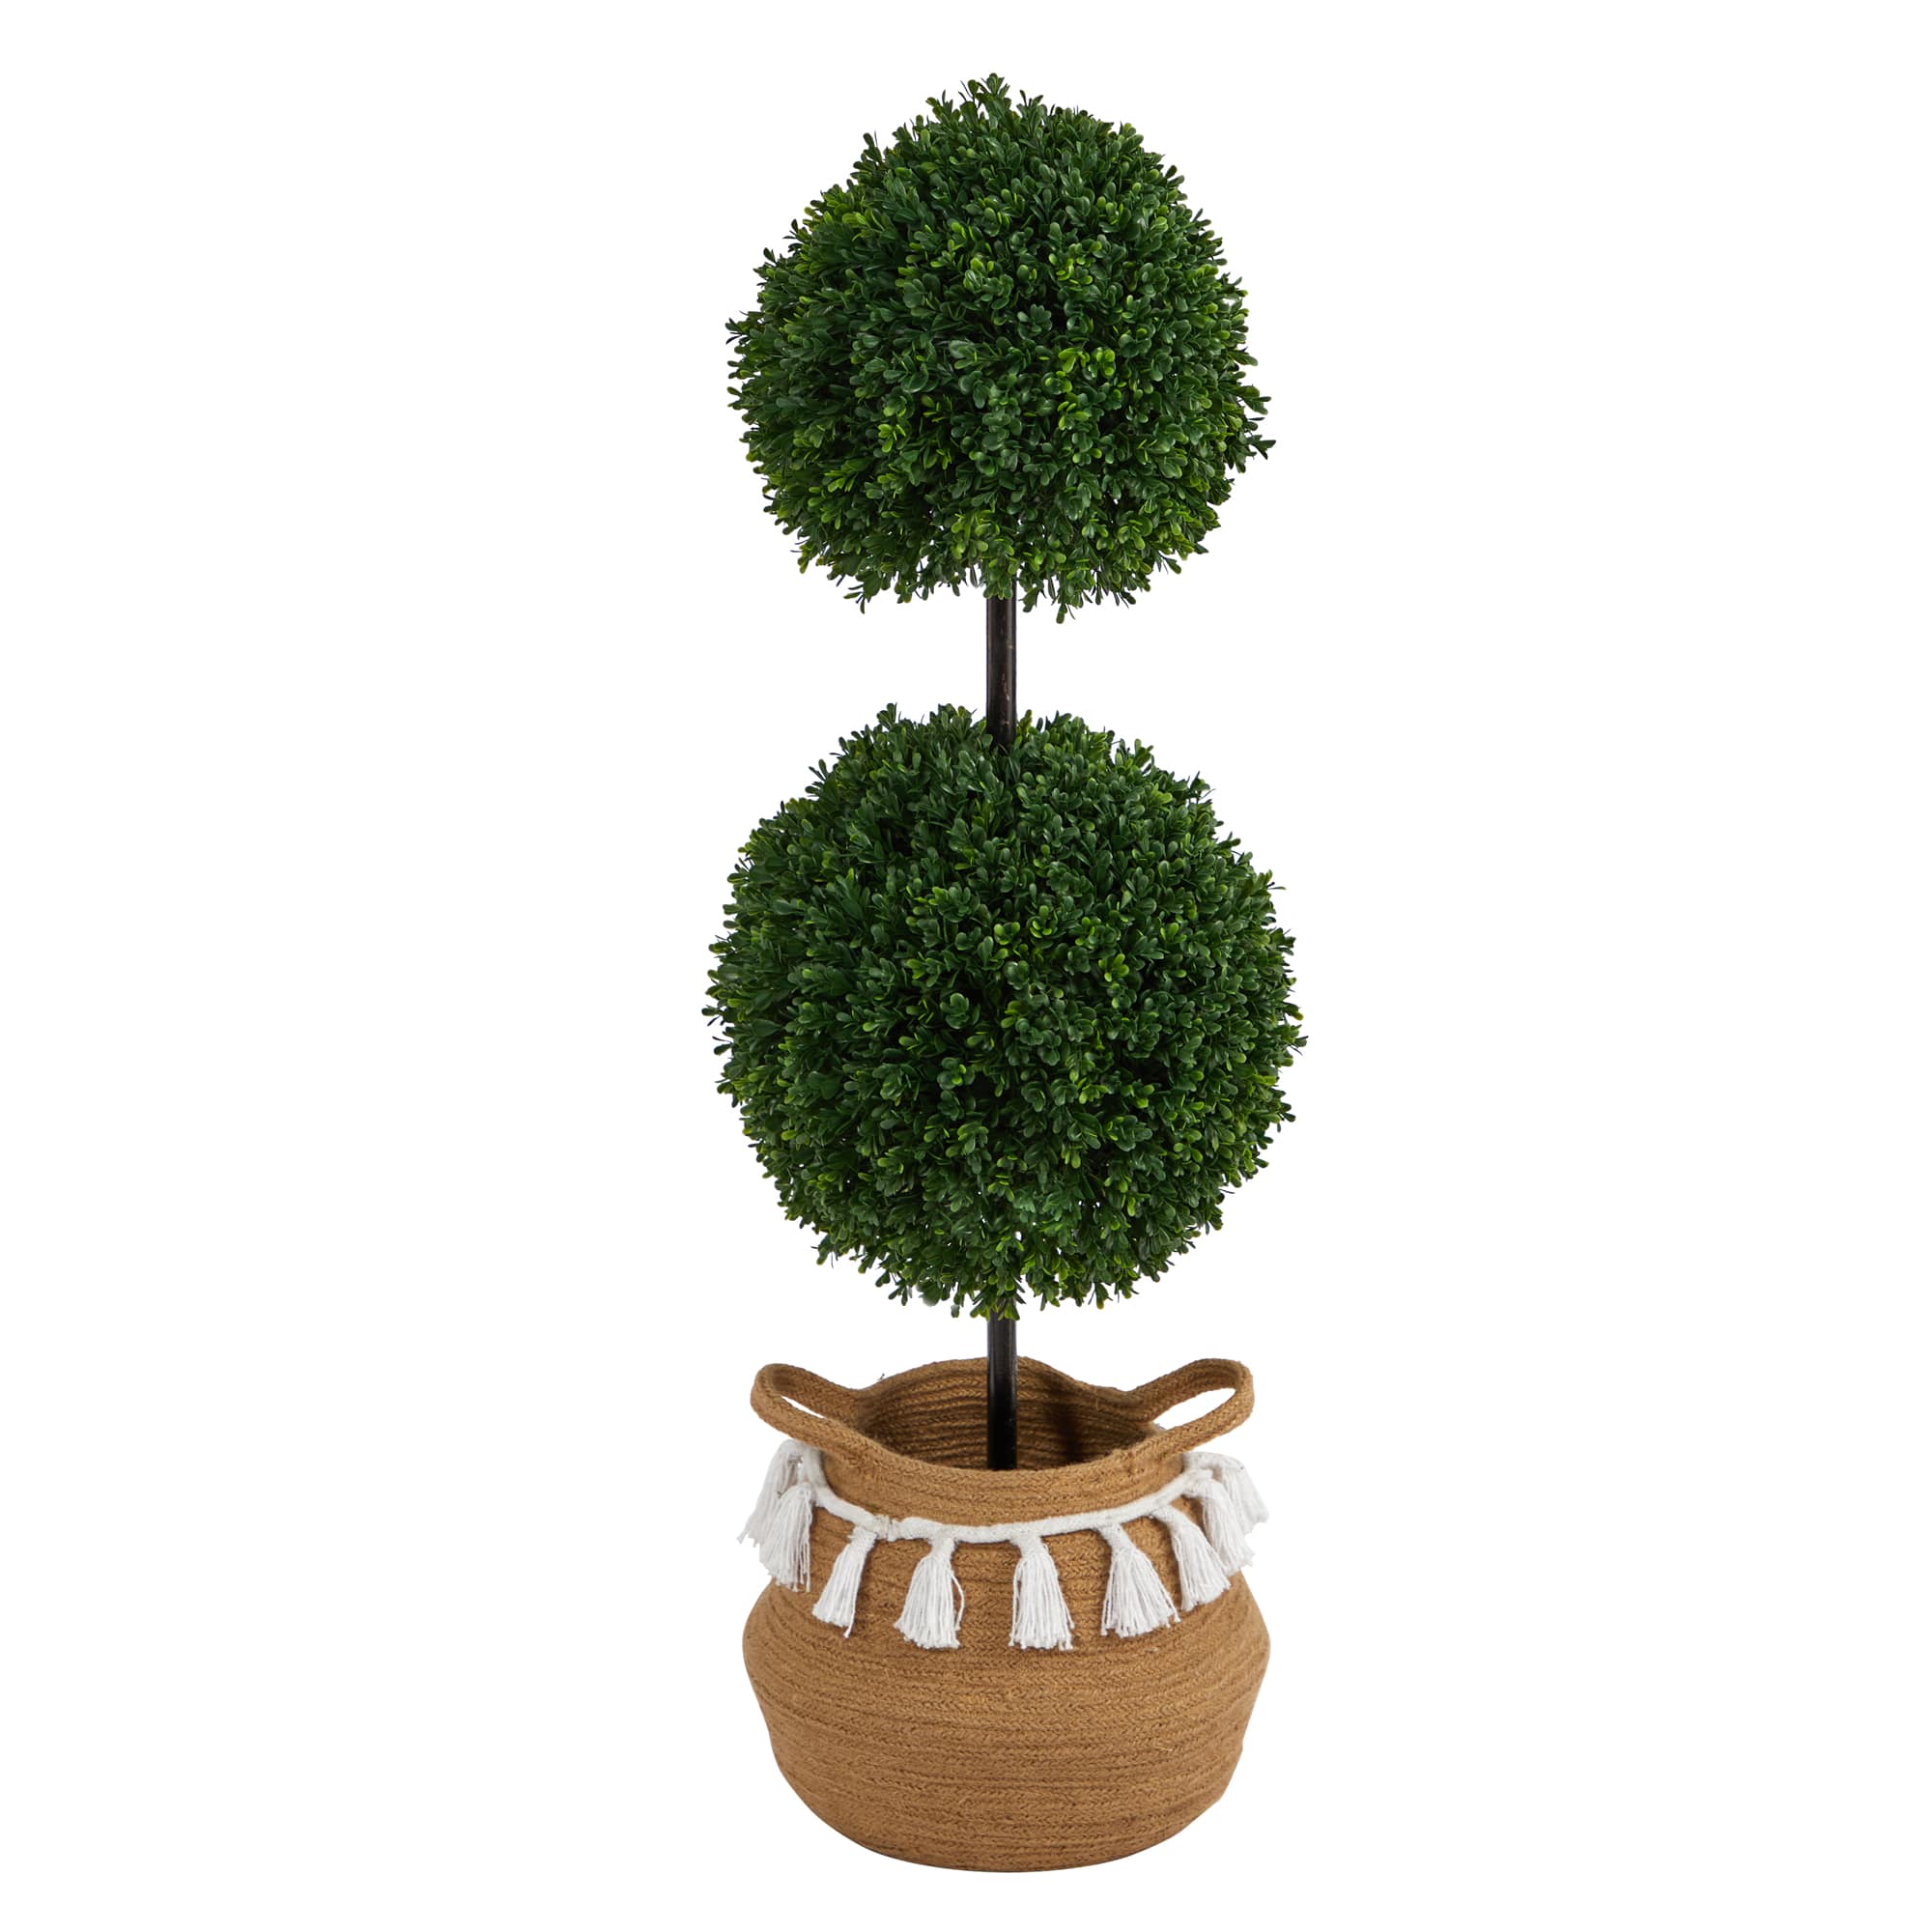 Lifelike Artificial Plant Ball Topiary Tree Boxwood Home Outdoor Party Decor All 